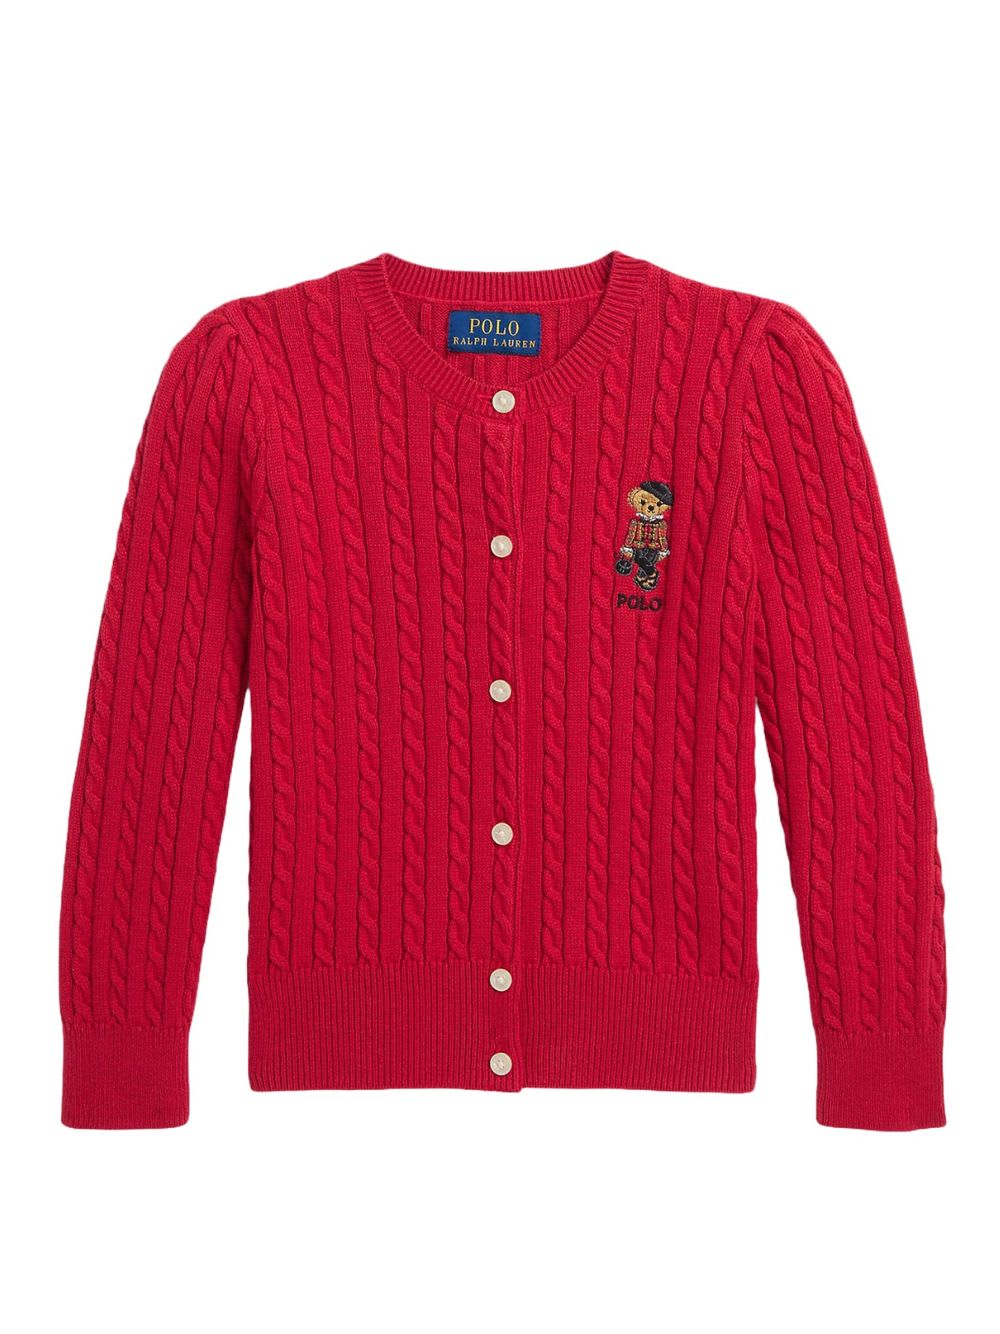 Polo Ralph Lauren Kids' Minicablbear Sweater Cardigan In Park Ave Red